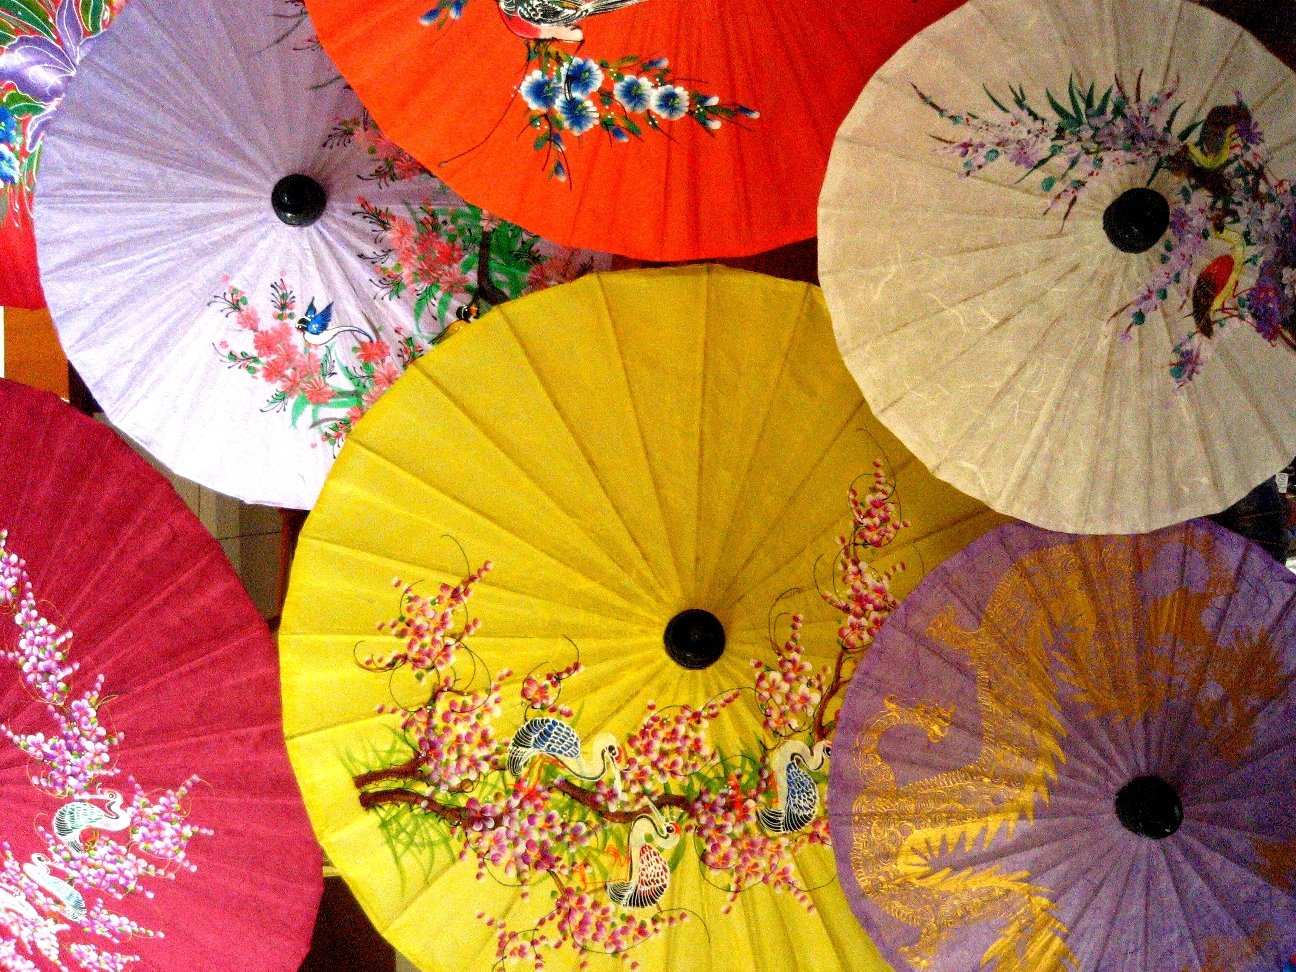 many colorful, umbrellas are arranged close together